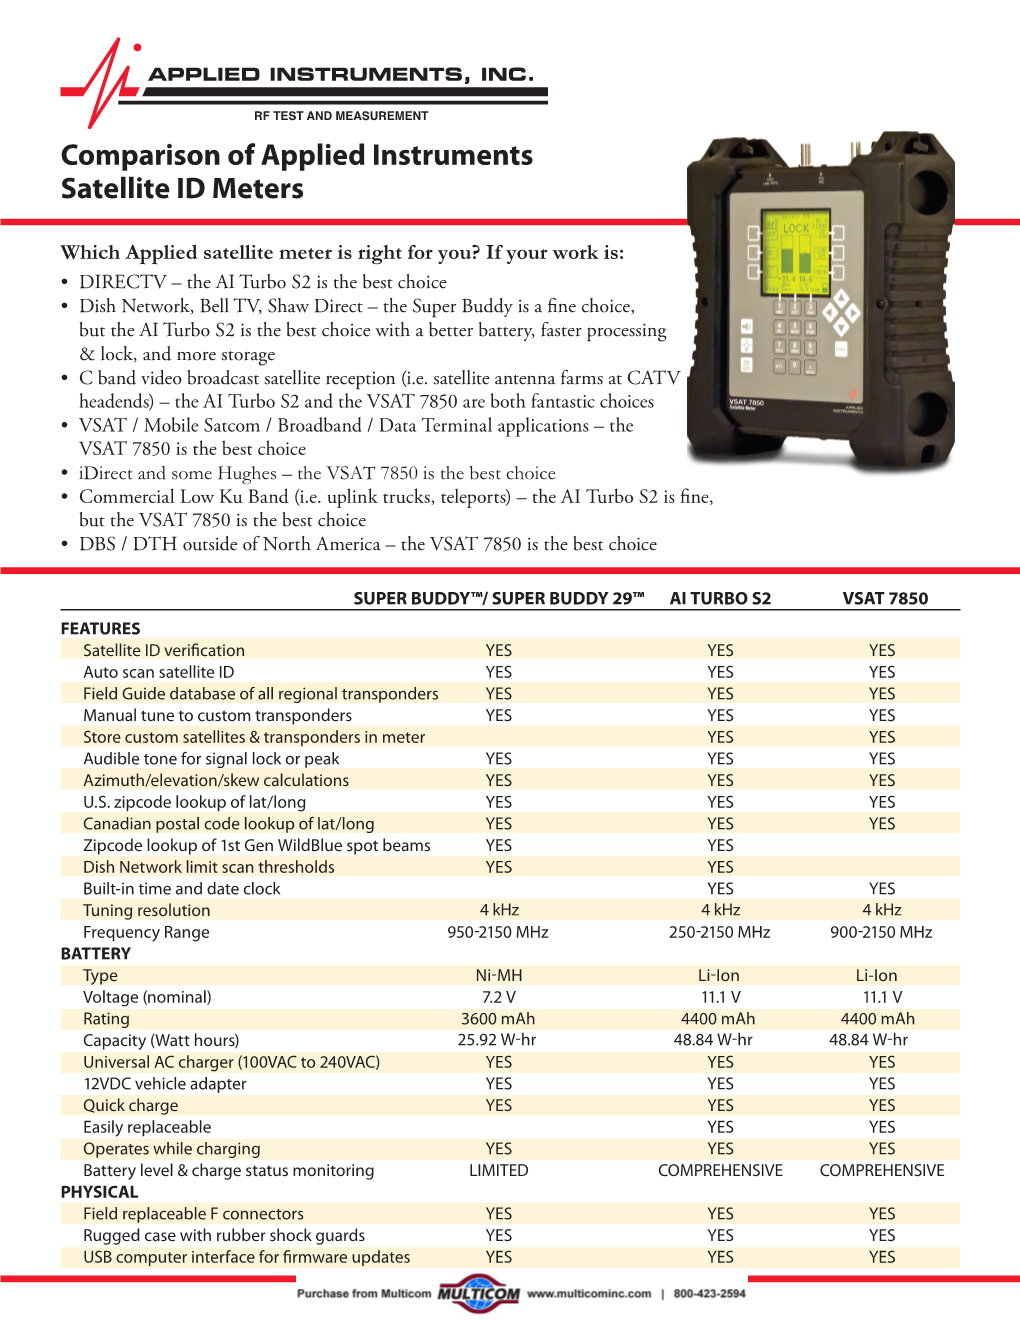 Comparison of Applied Instruments Satellite ID Meters